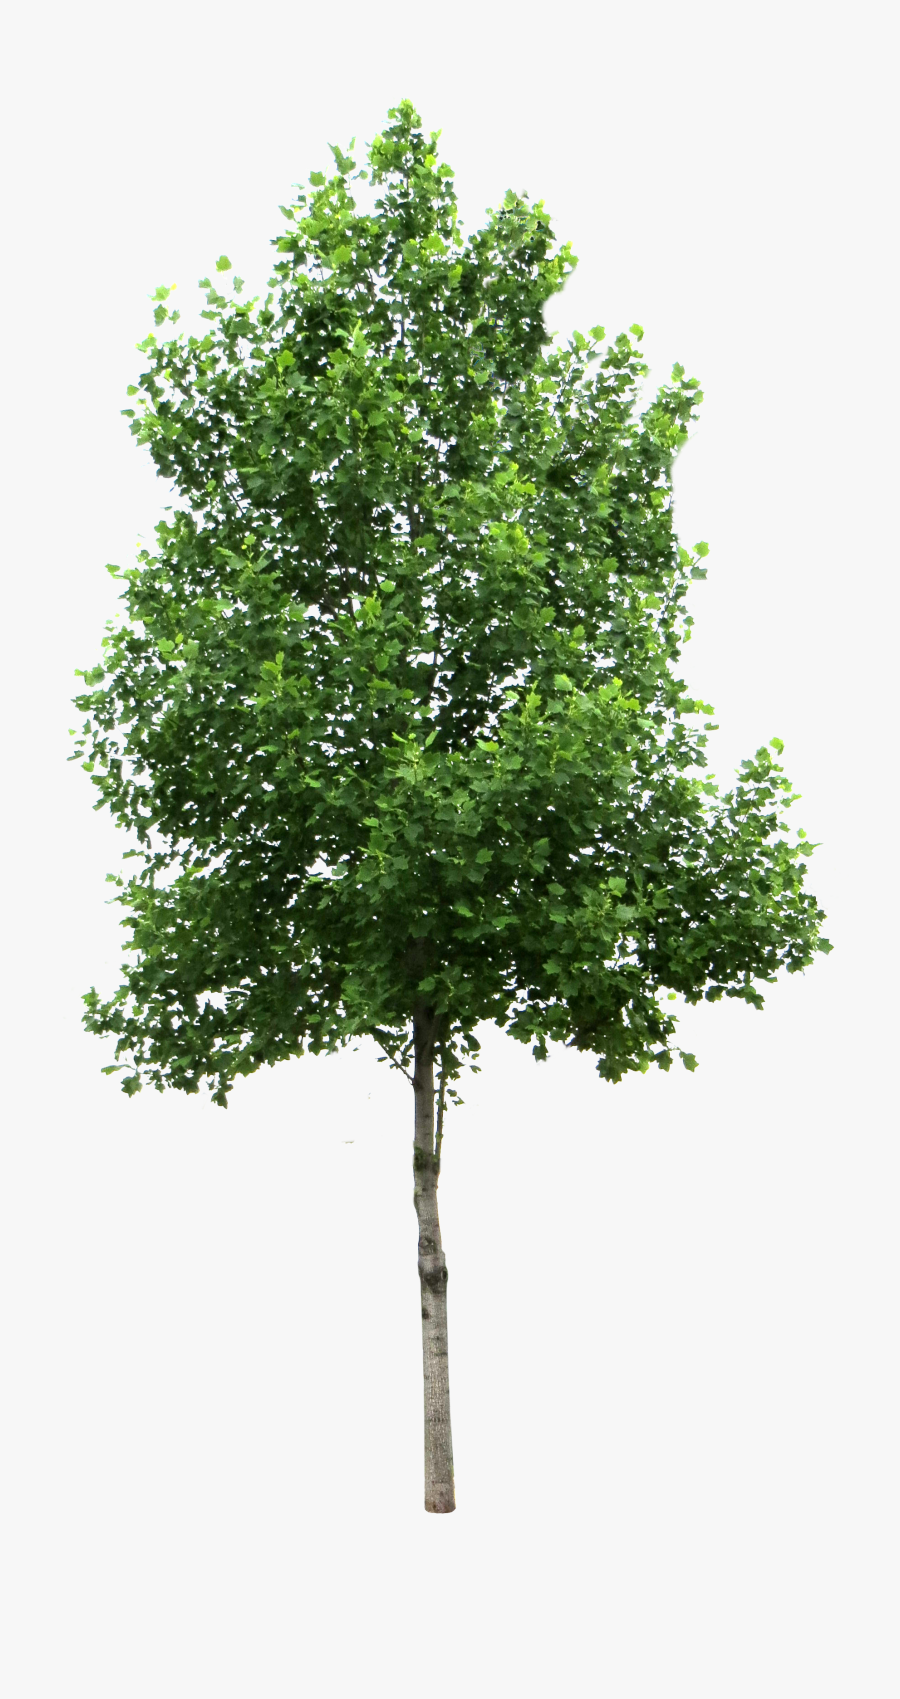 Birch Tree Small - Transparent Background Tree Png, Transparent Clipart